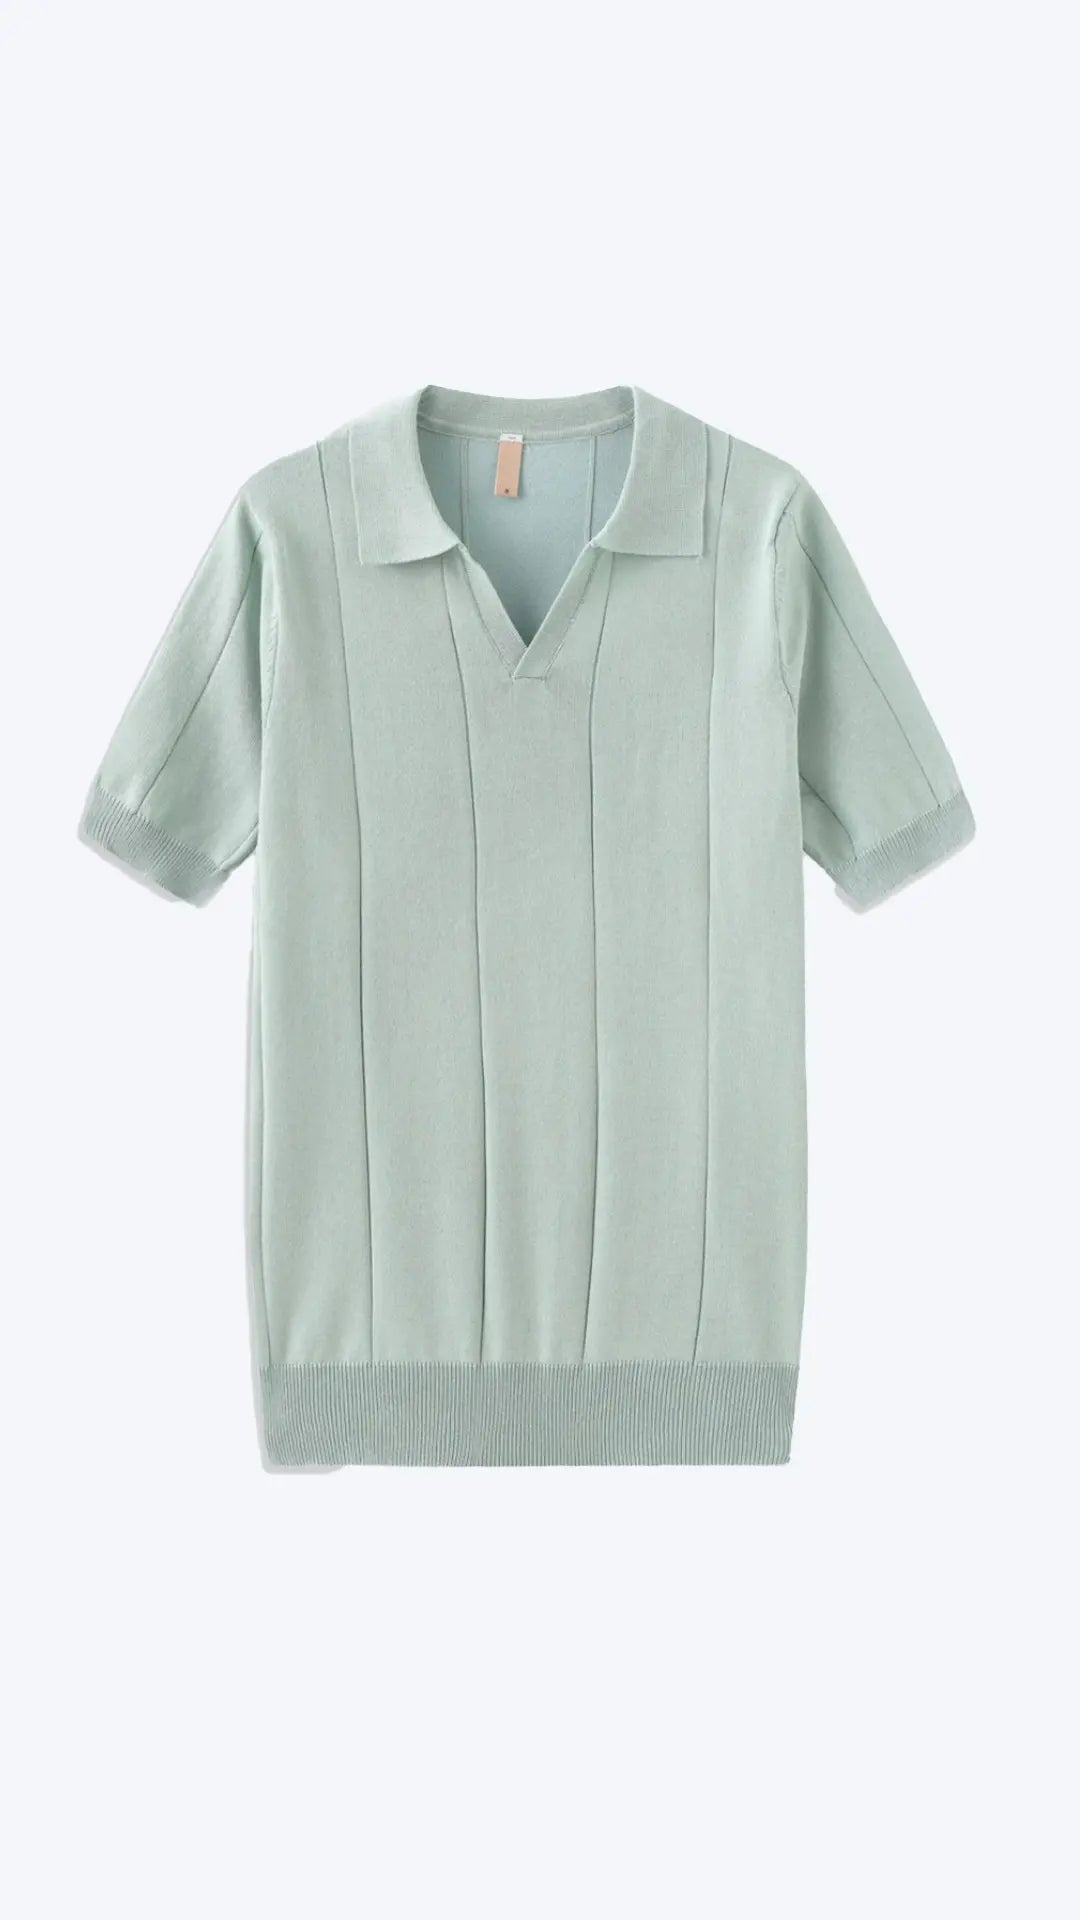 Style with the Linear Polo Shirt